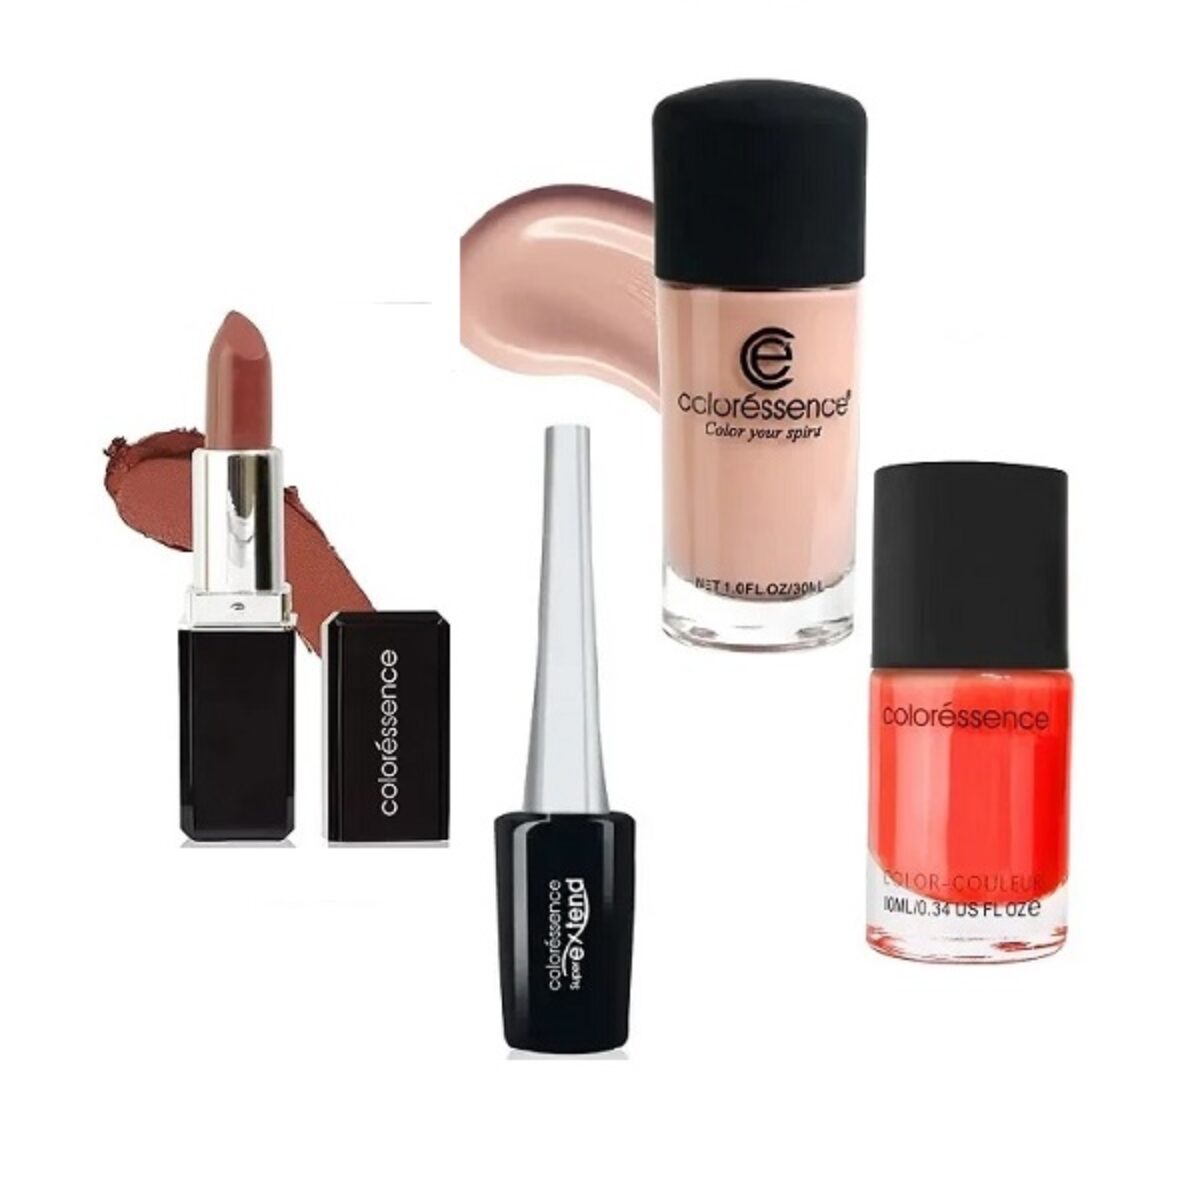 COLORESSENCE Bridal Bling Makeup Kit (Combo of 6 Bridal Makeup Products)  Price in India - Buy COLORESSENCE Bridal Bling Makeup Kit (Combo of 6  Bridal Makeup Products) online at Flipkart.com